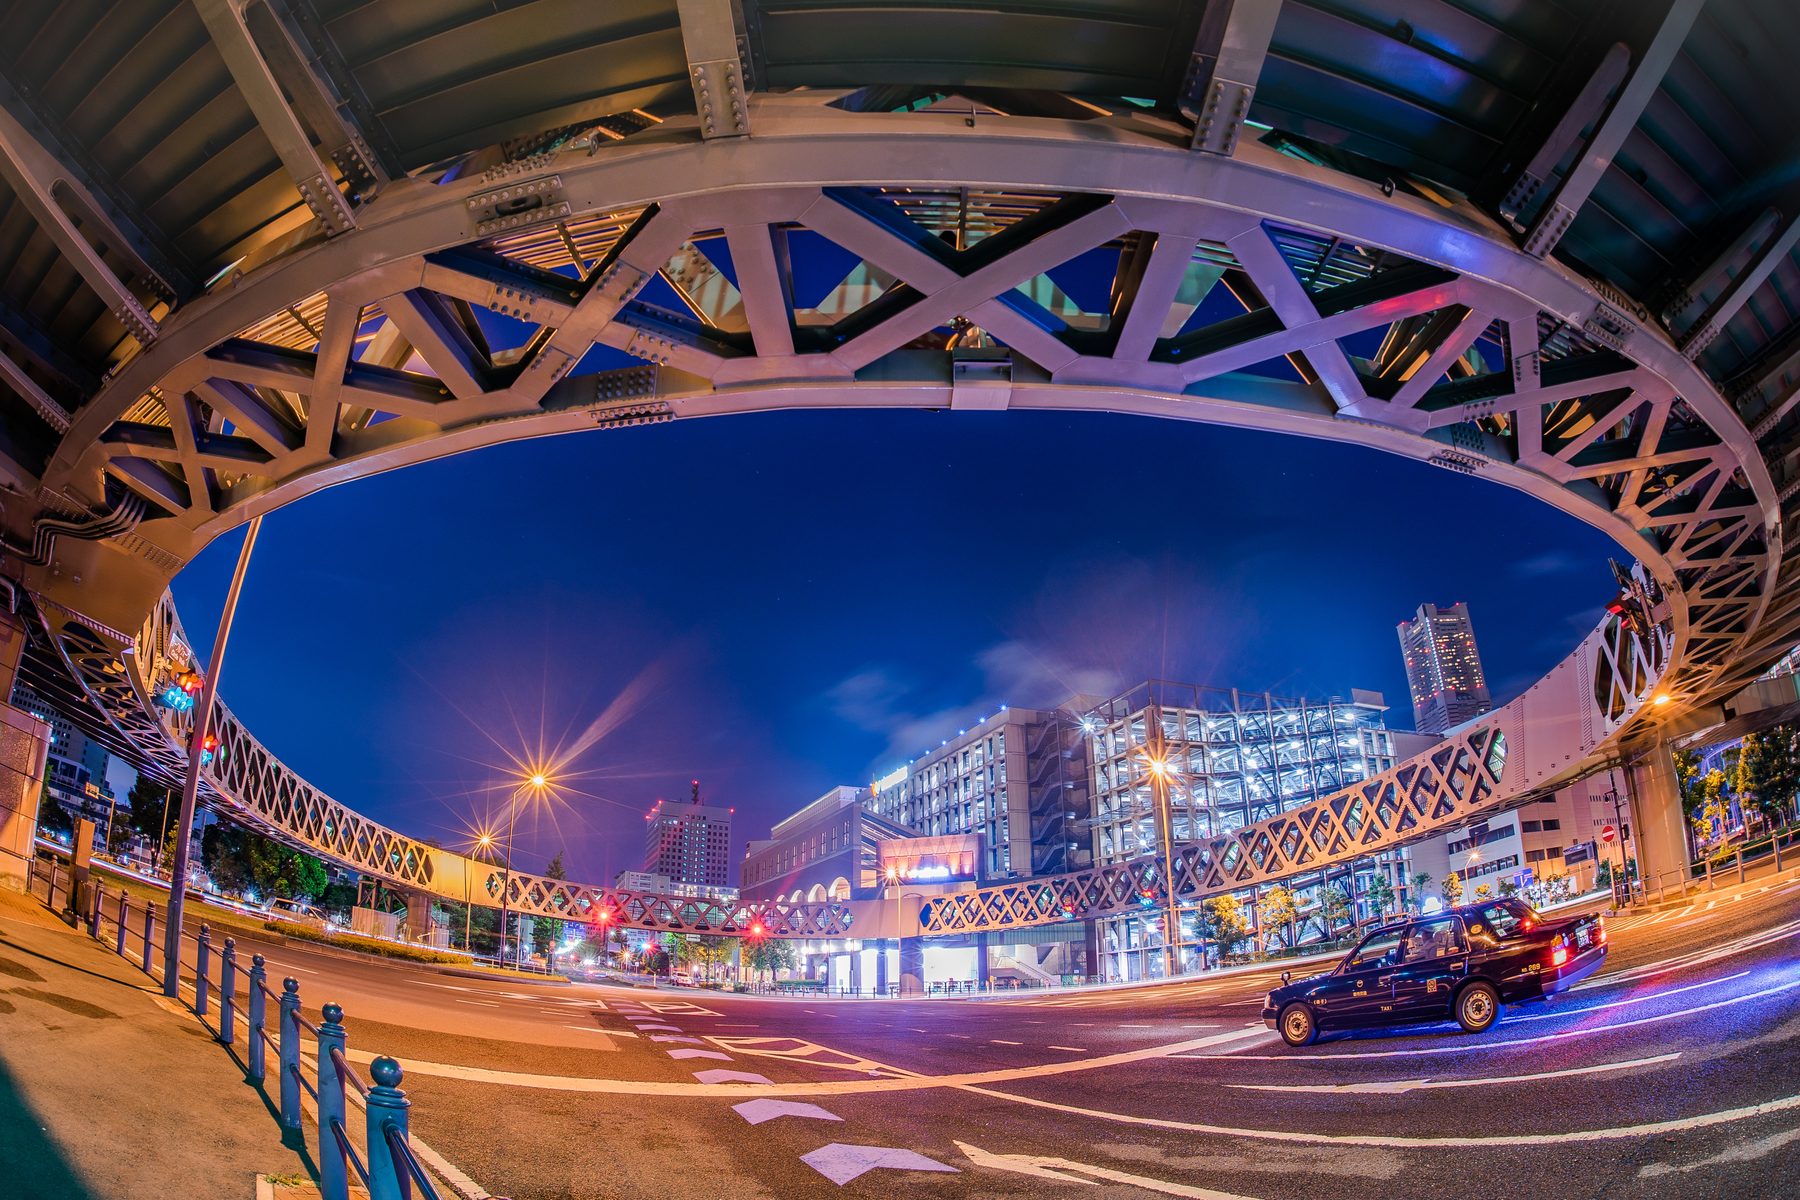 How to Get Creative with a Fisheye Lens